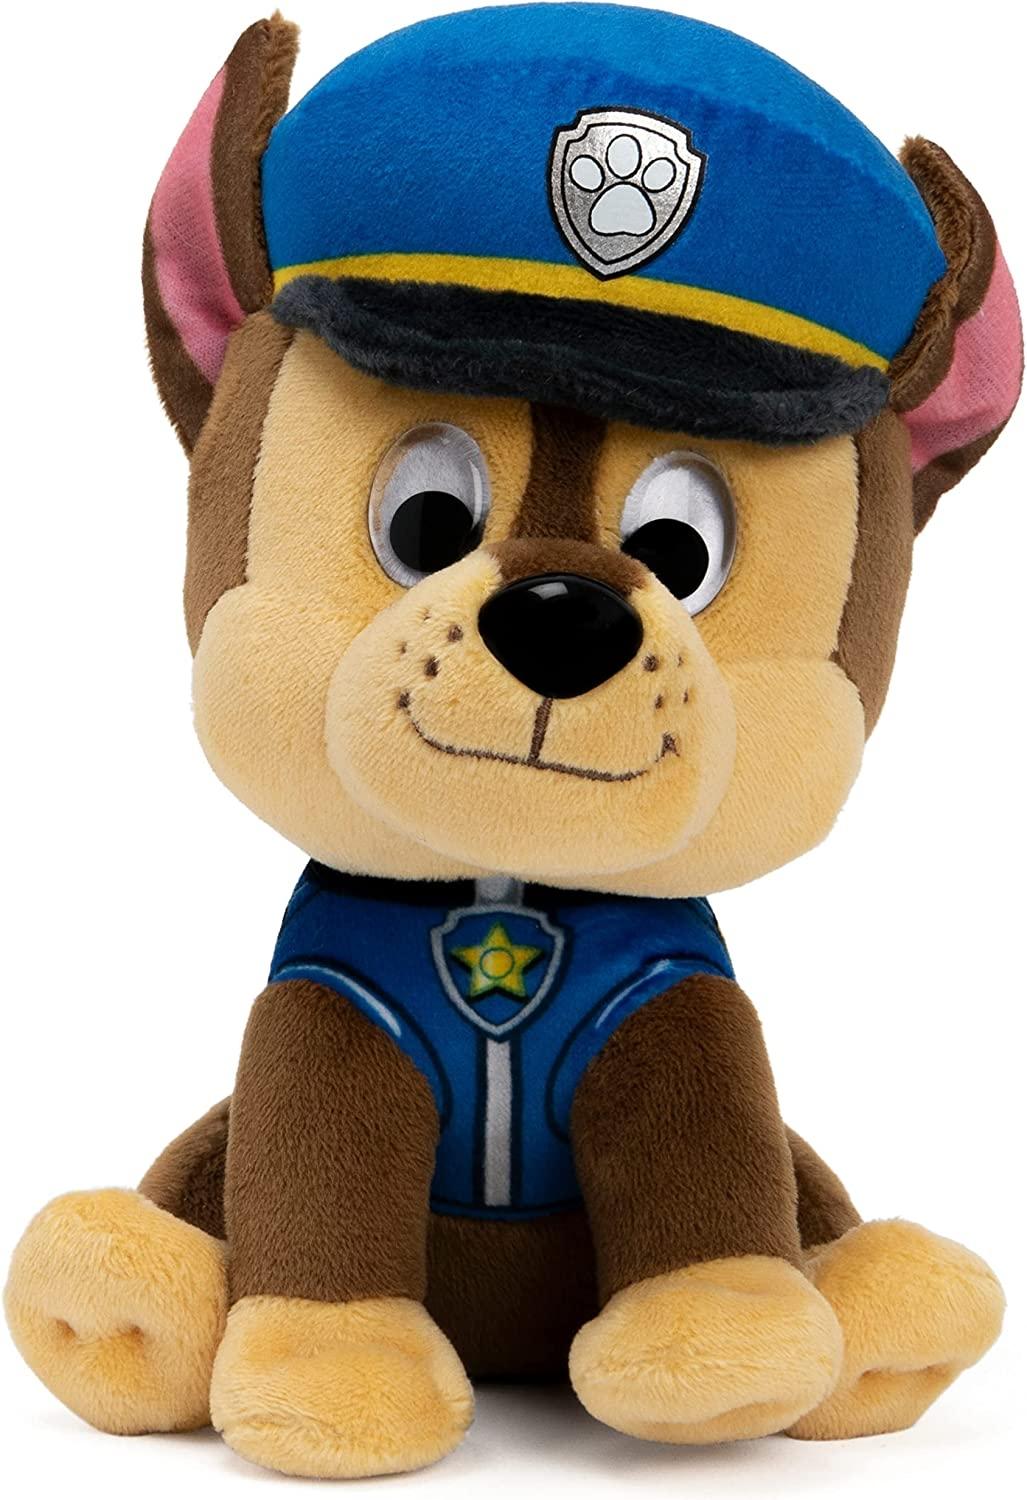 PELUCHE PATRULLA CANINA 15 CM CHASE SPIN 4886058437